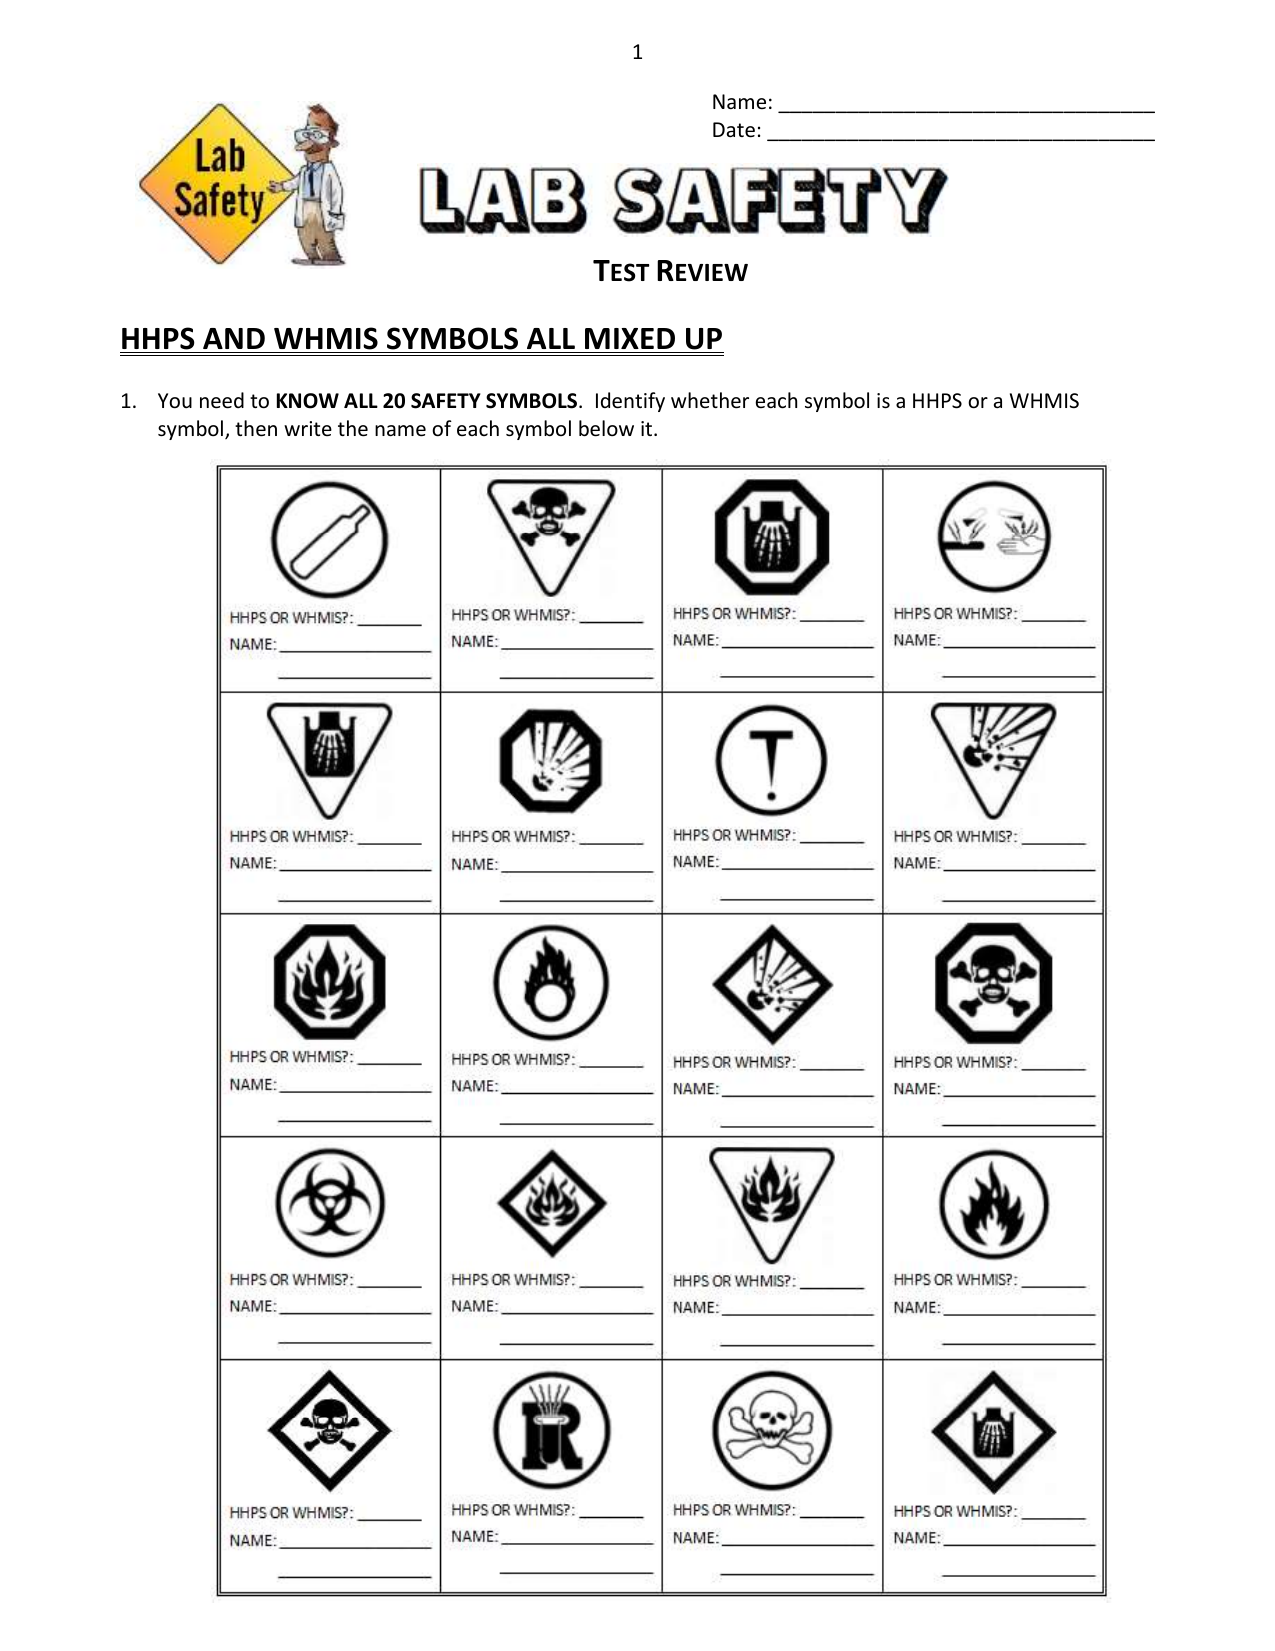 safety-in-the-lab-worksheet-answers